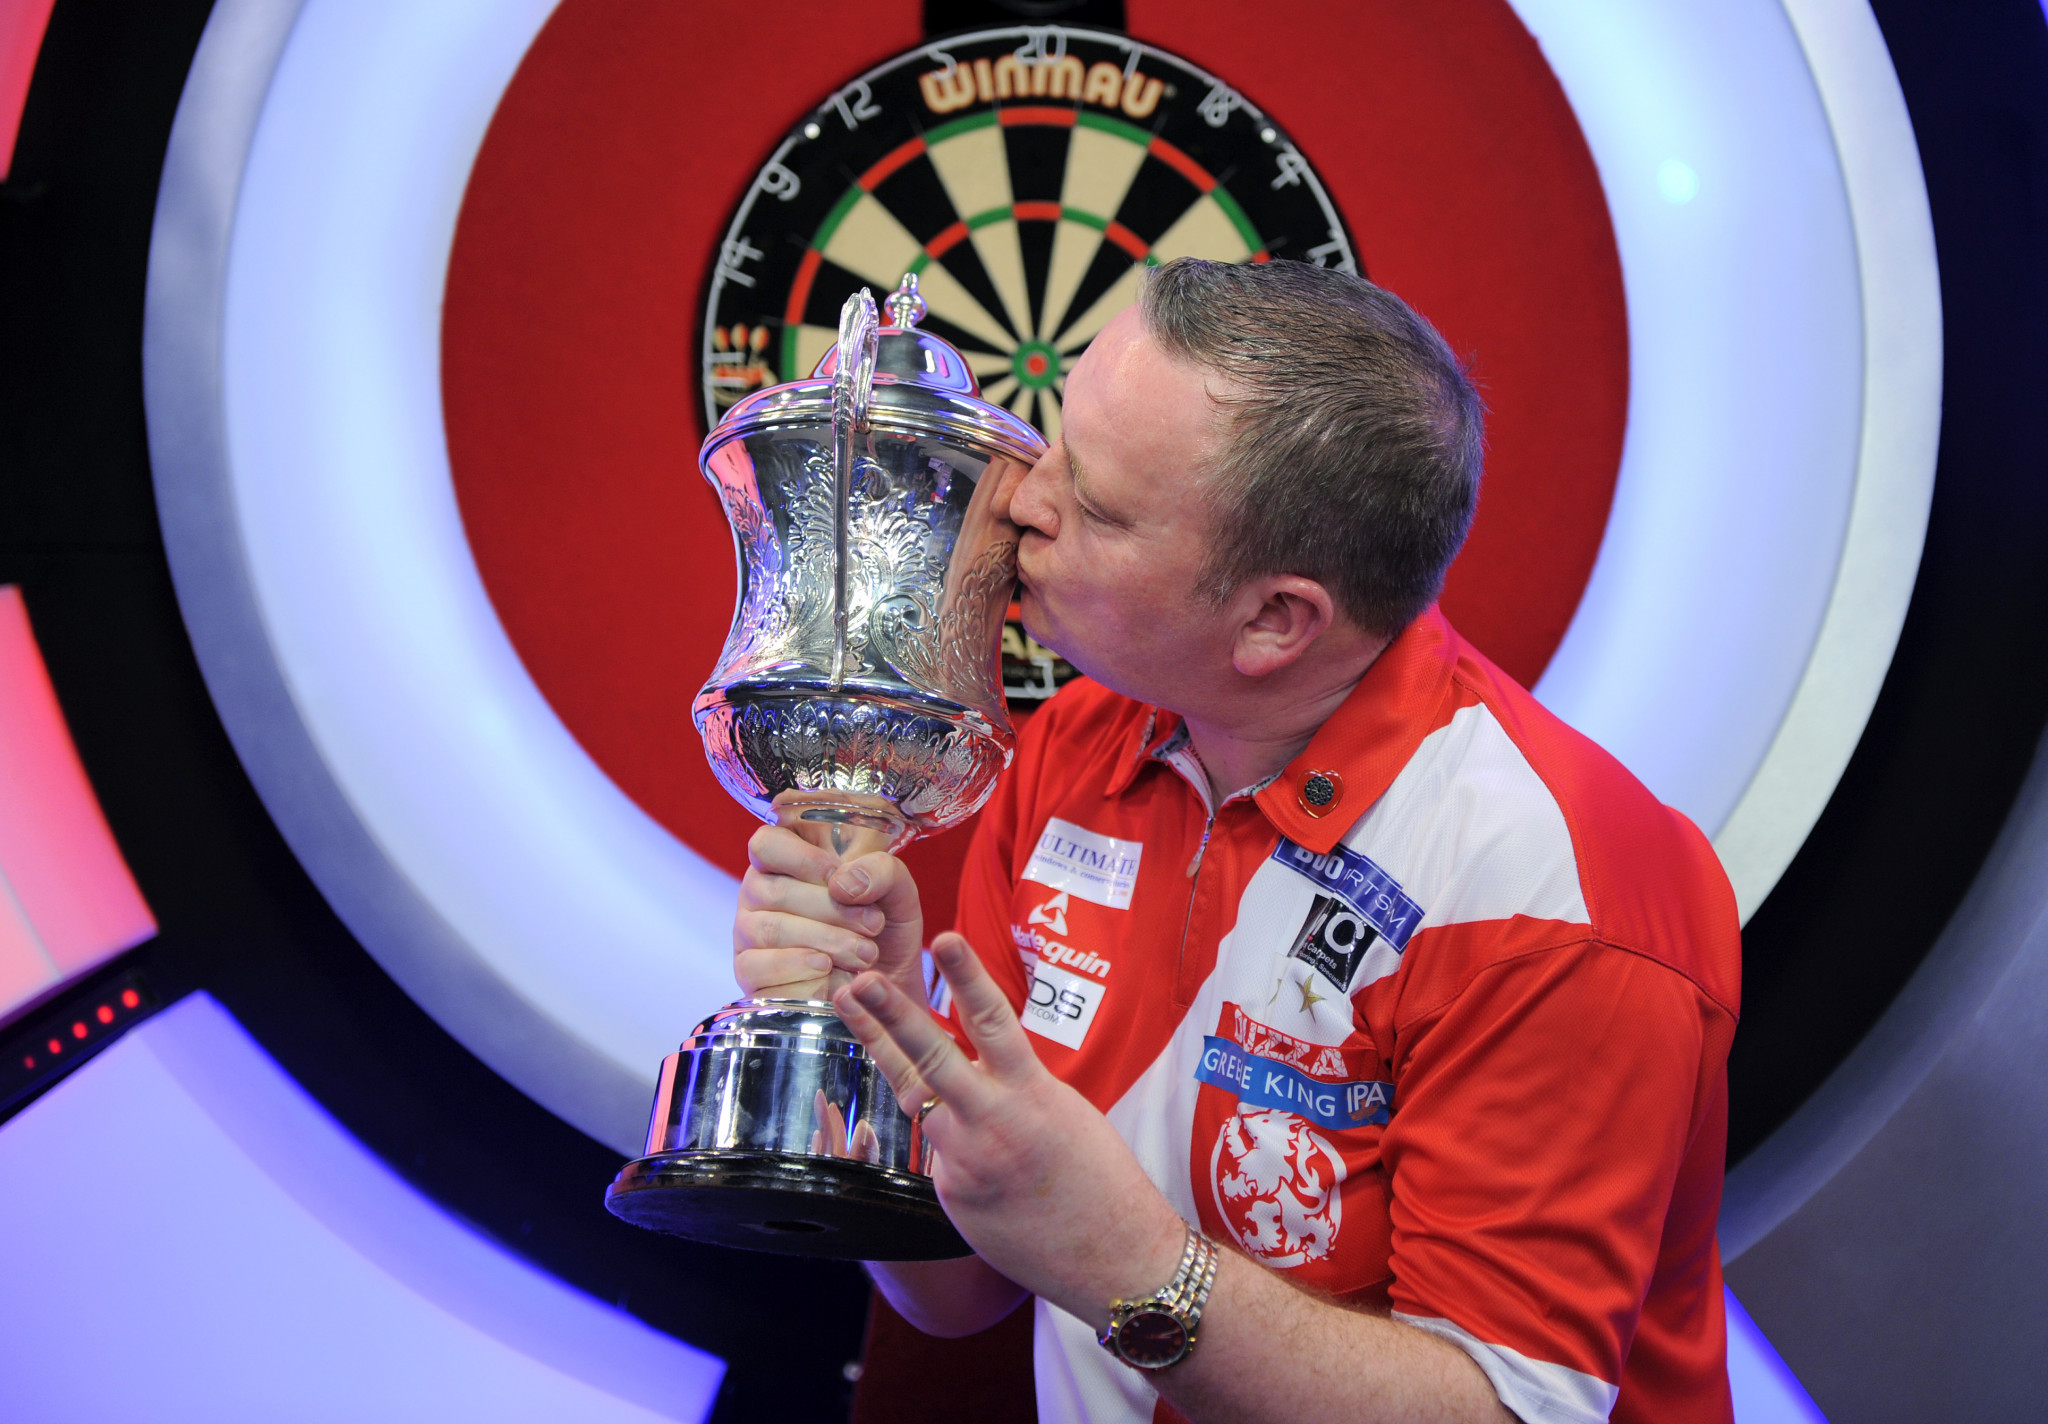 Durrant wins BDO World Championship title for third time in a row